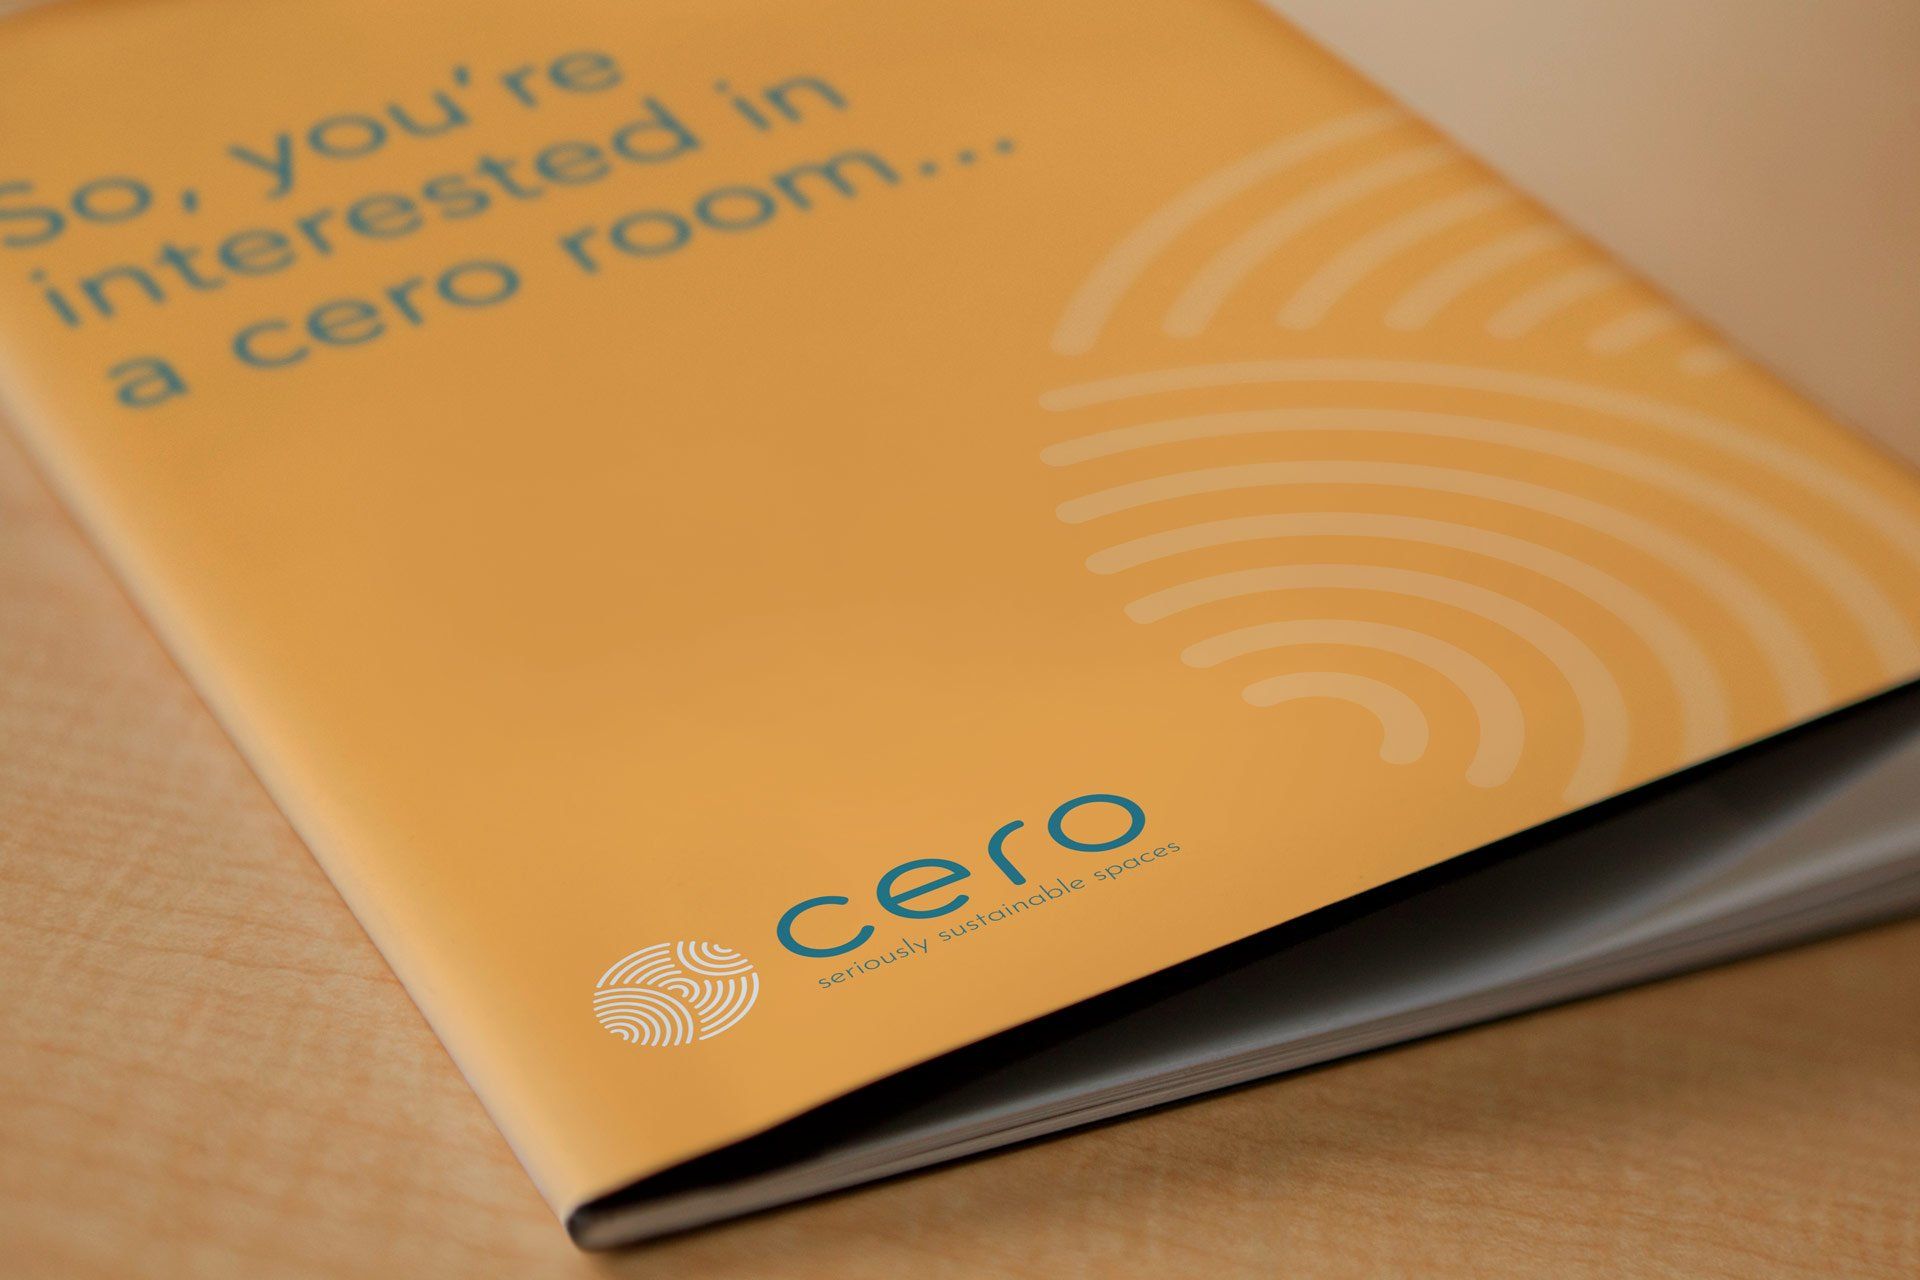 Closeup of a book with the cero logo on it saying 